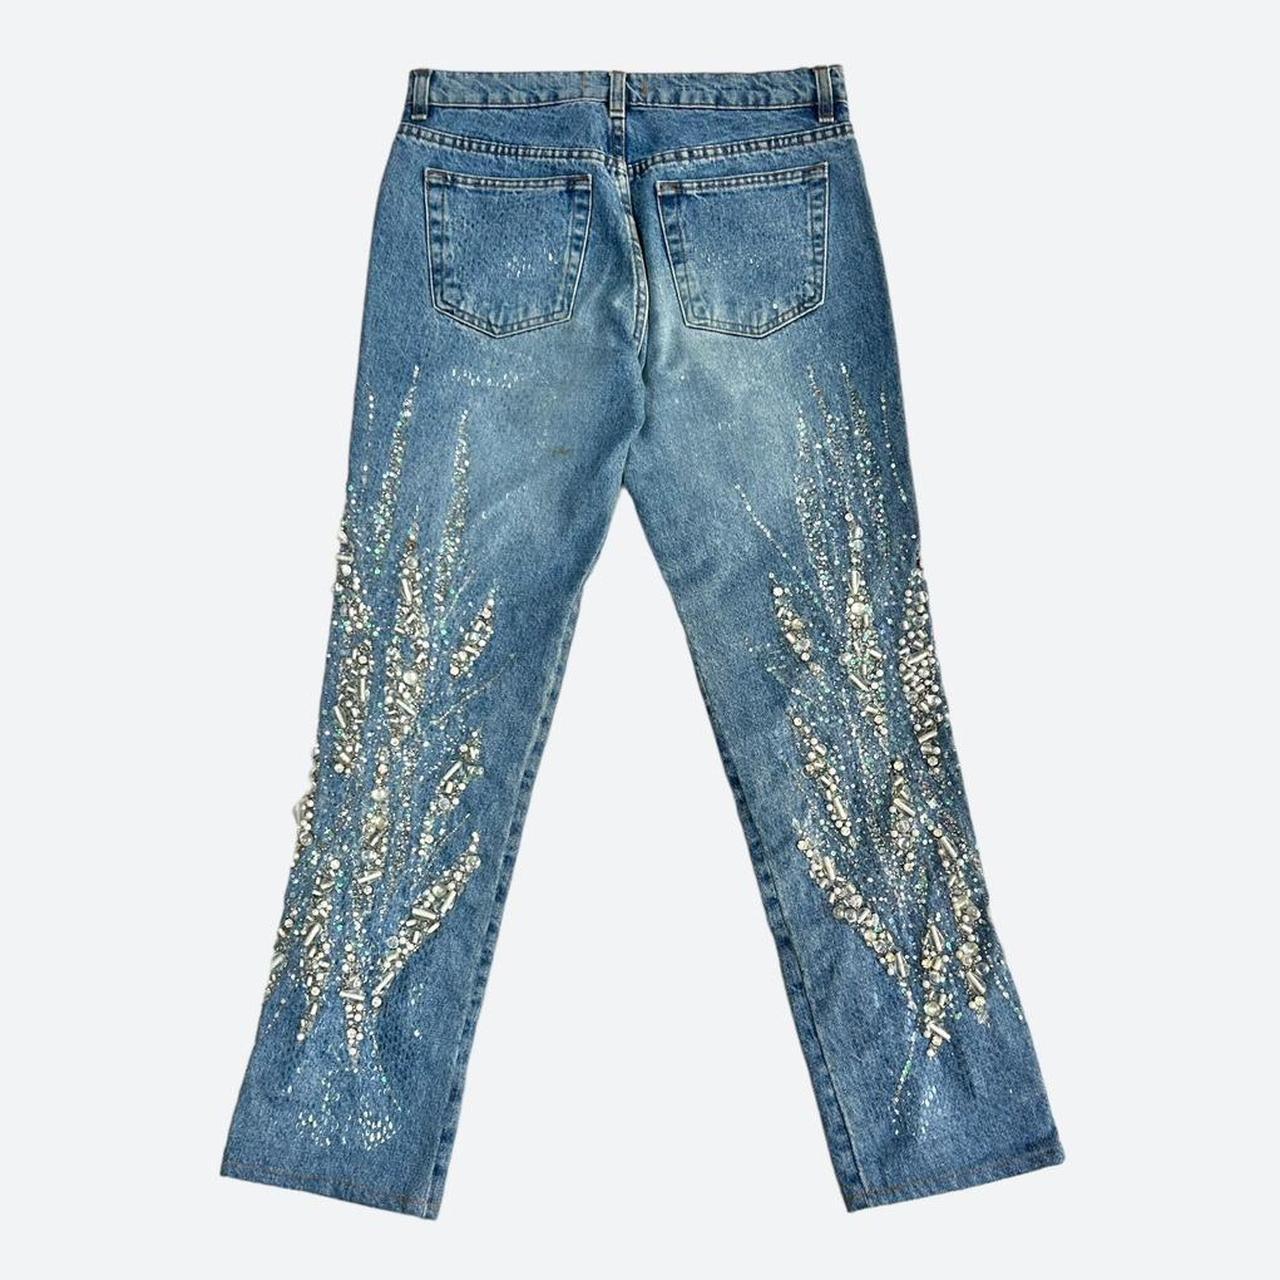 Very rare Roberto Cavalli blue jeans from the brilliant SS 2000 Diamond Collection, these are embellished from the thighs down in hand-embroidered silver beads, rhinestones and sequins, creating a magical, glistening abstract design around the legs